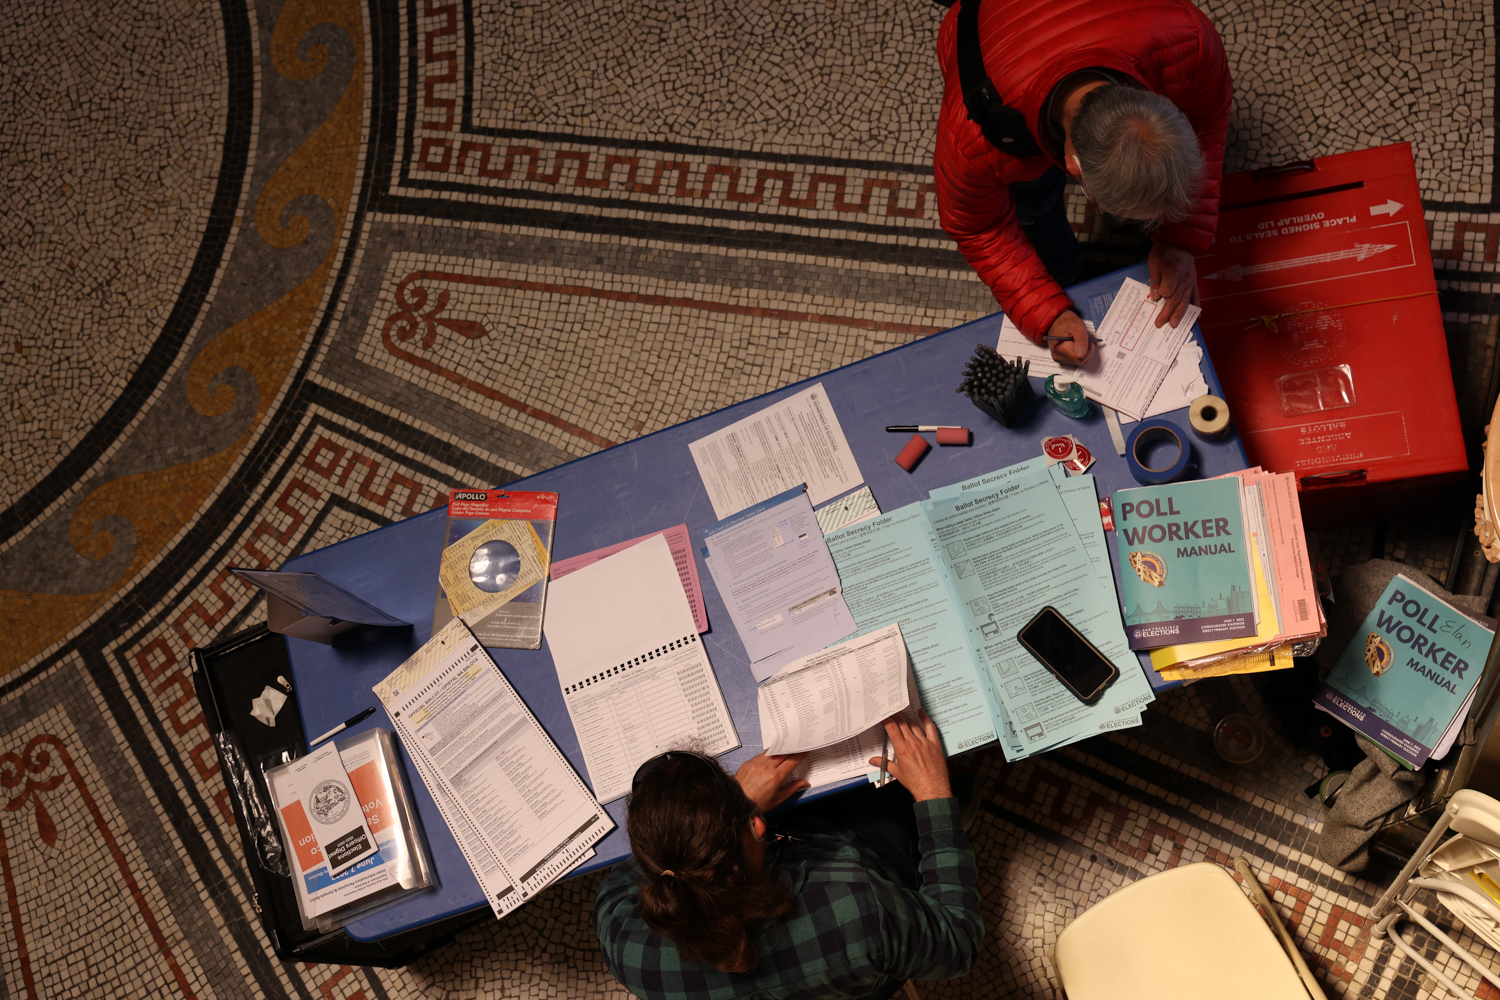 Two individuals are at a table with paperwork, possibly in a voting area, with a decorative tile floor visible.